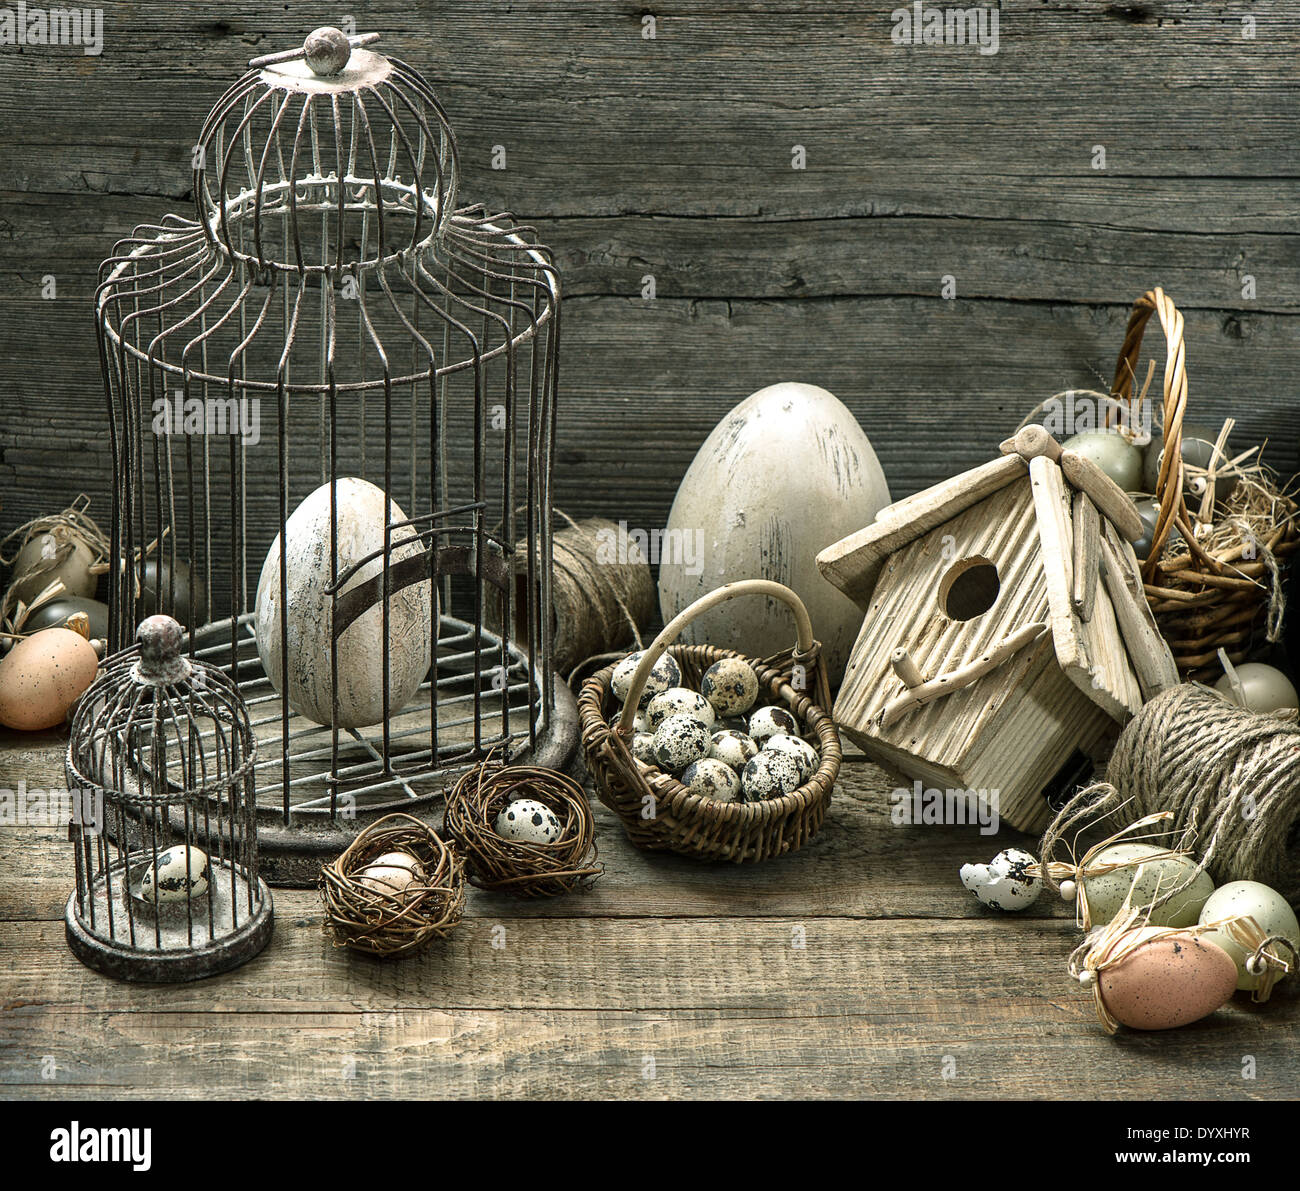 vintage easter decoration with eggs, birdhouse and birdcage. nostalgic still life home interior. wooden background Stock Photo